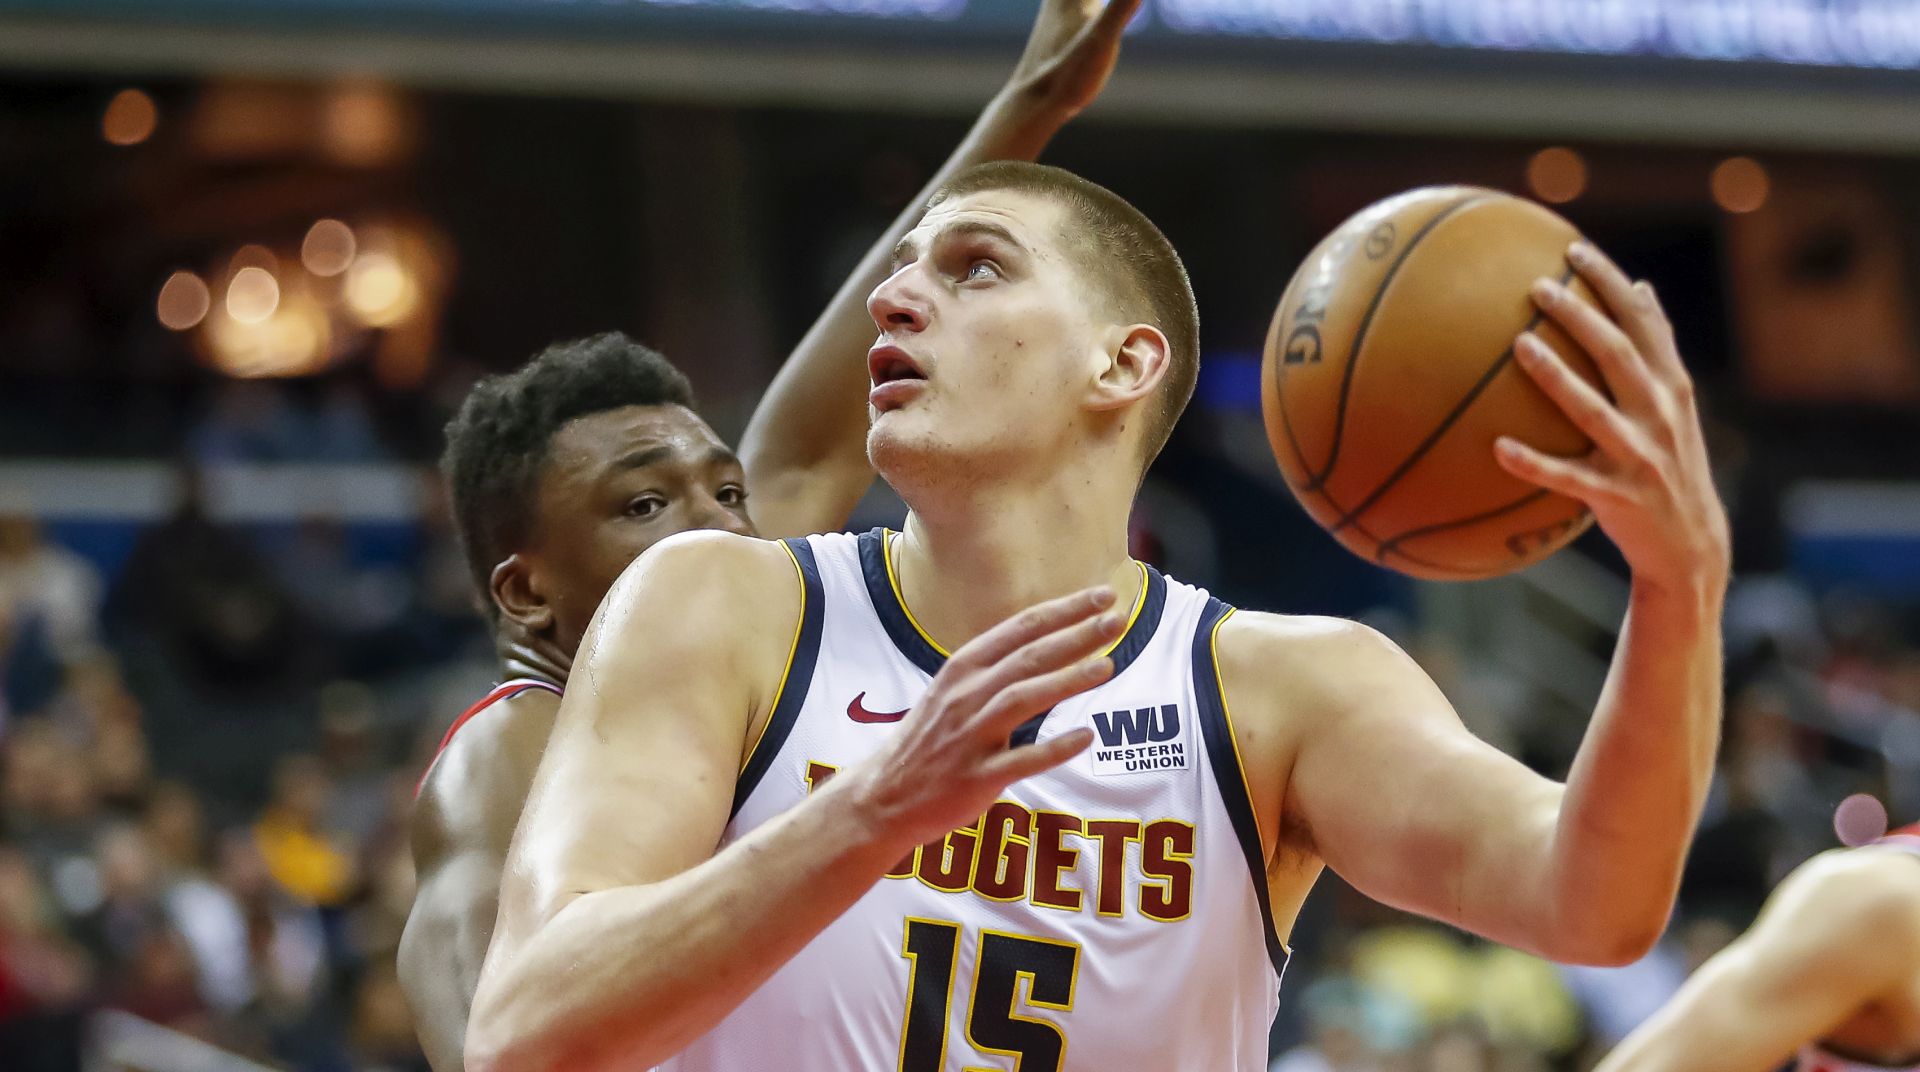 epa08505950 (FILE) - Denver Nuggets center Nikola Jokic (R) in action against Washington Wizards center Thomas Bryant (L) during the NBA basketball game between the Denver Nuggets and the Washington Wizards in Washington, DC, USA, 21 March 2019 (re-issued on 24 June 2020). Serbian basketball player Nikola Jokic of the Denver Nuggets was tested positive for the coronavirus COVID-19 disease, the Denver Post confirmed on late 23 June 2020. Jokic met Serbian tennis player Novak Djokovic during the Adria Tour tennis tournament in Belgrade.  EPA/ERIK S. LESSER SHUTTERSTOCK OUT